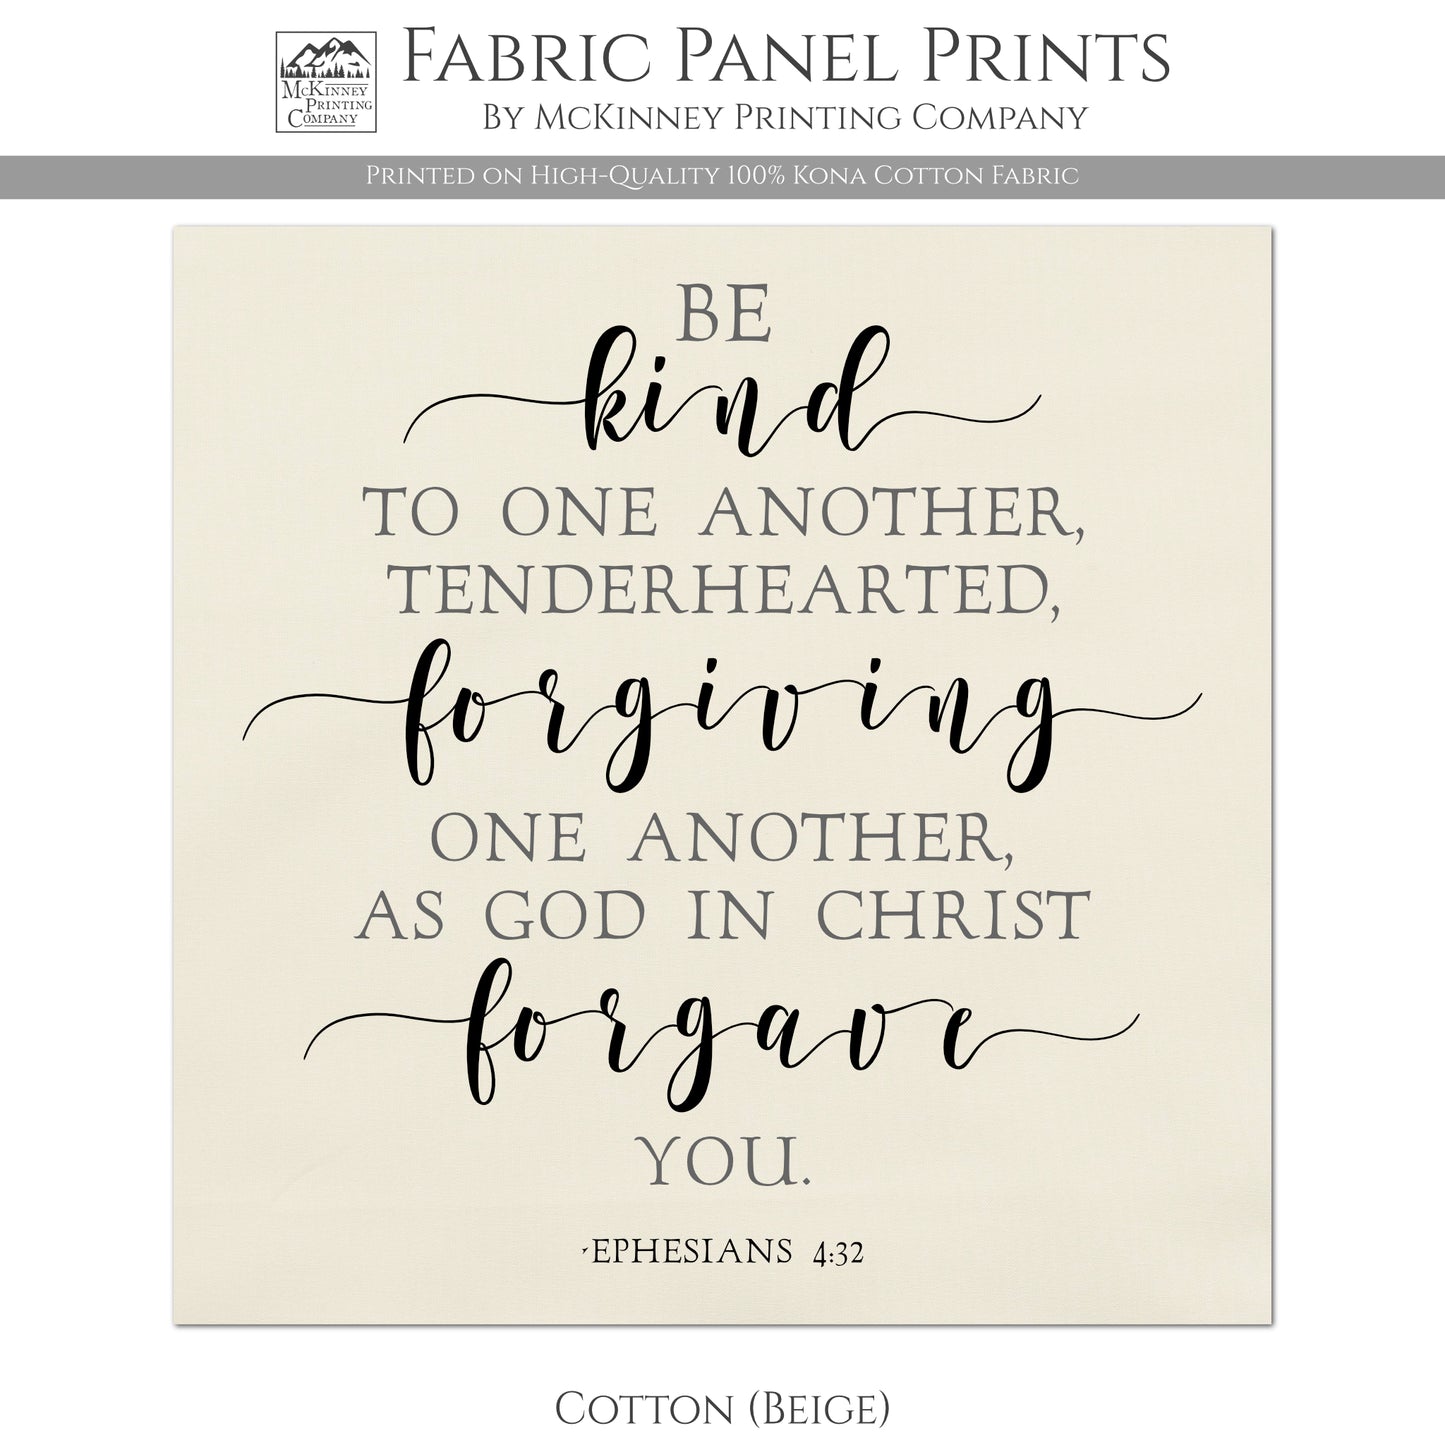 Be kind to one another, tenderhearted, forgiving one another as god in Christ forgave you. - Kona Cotton Fabric